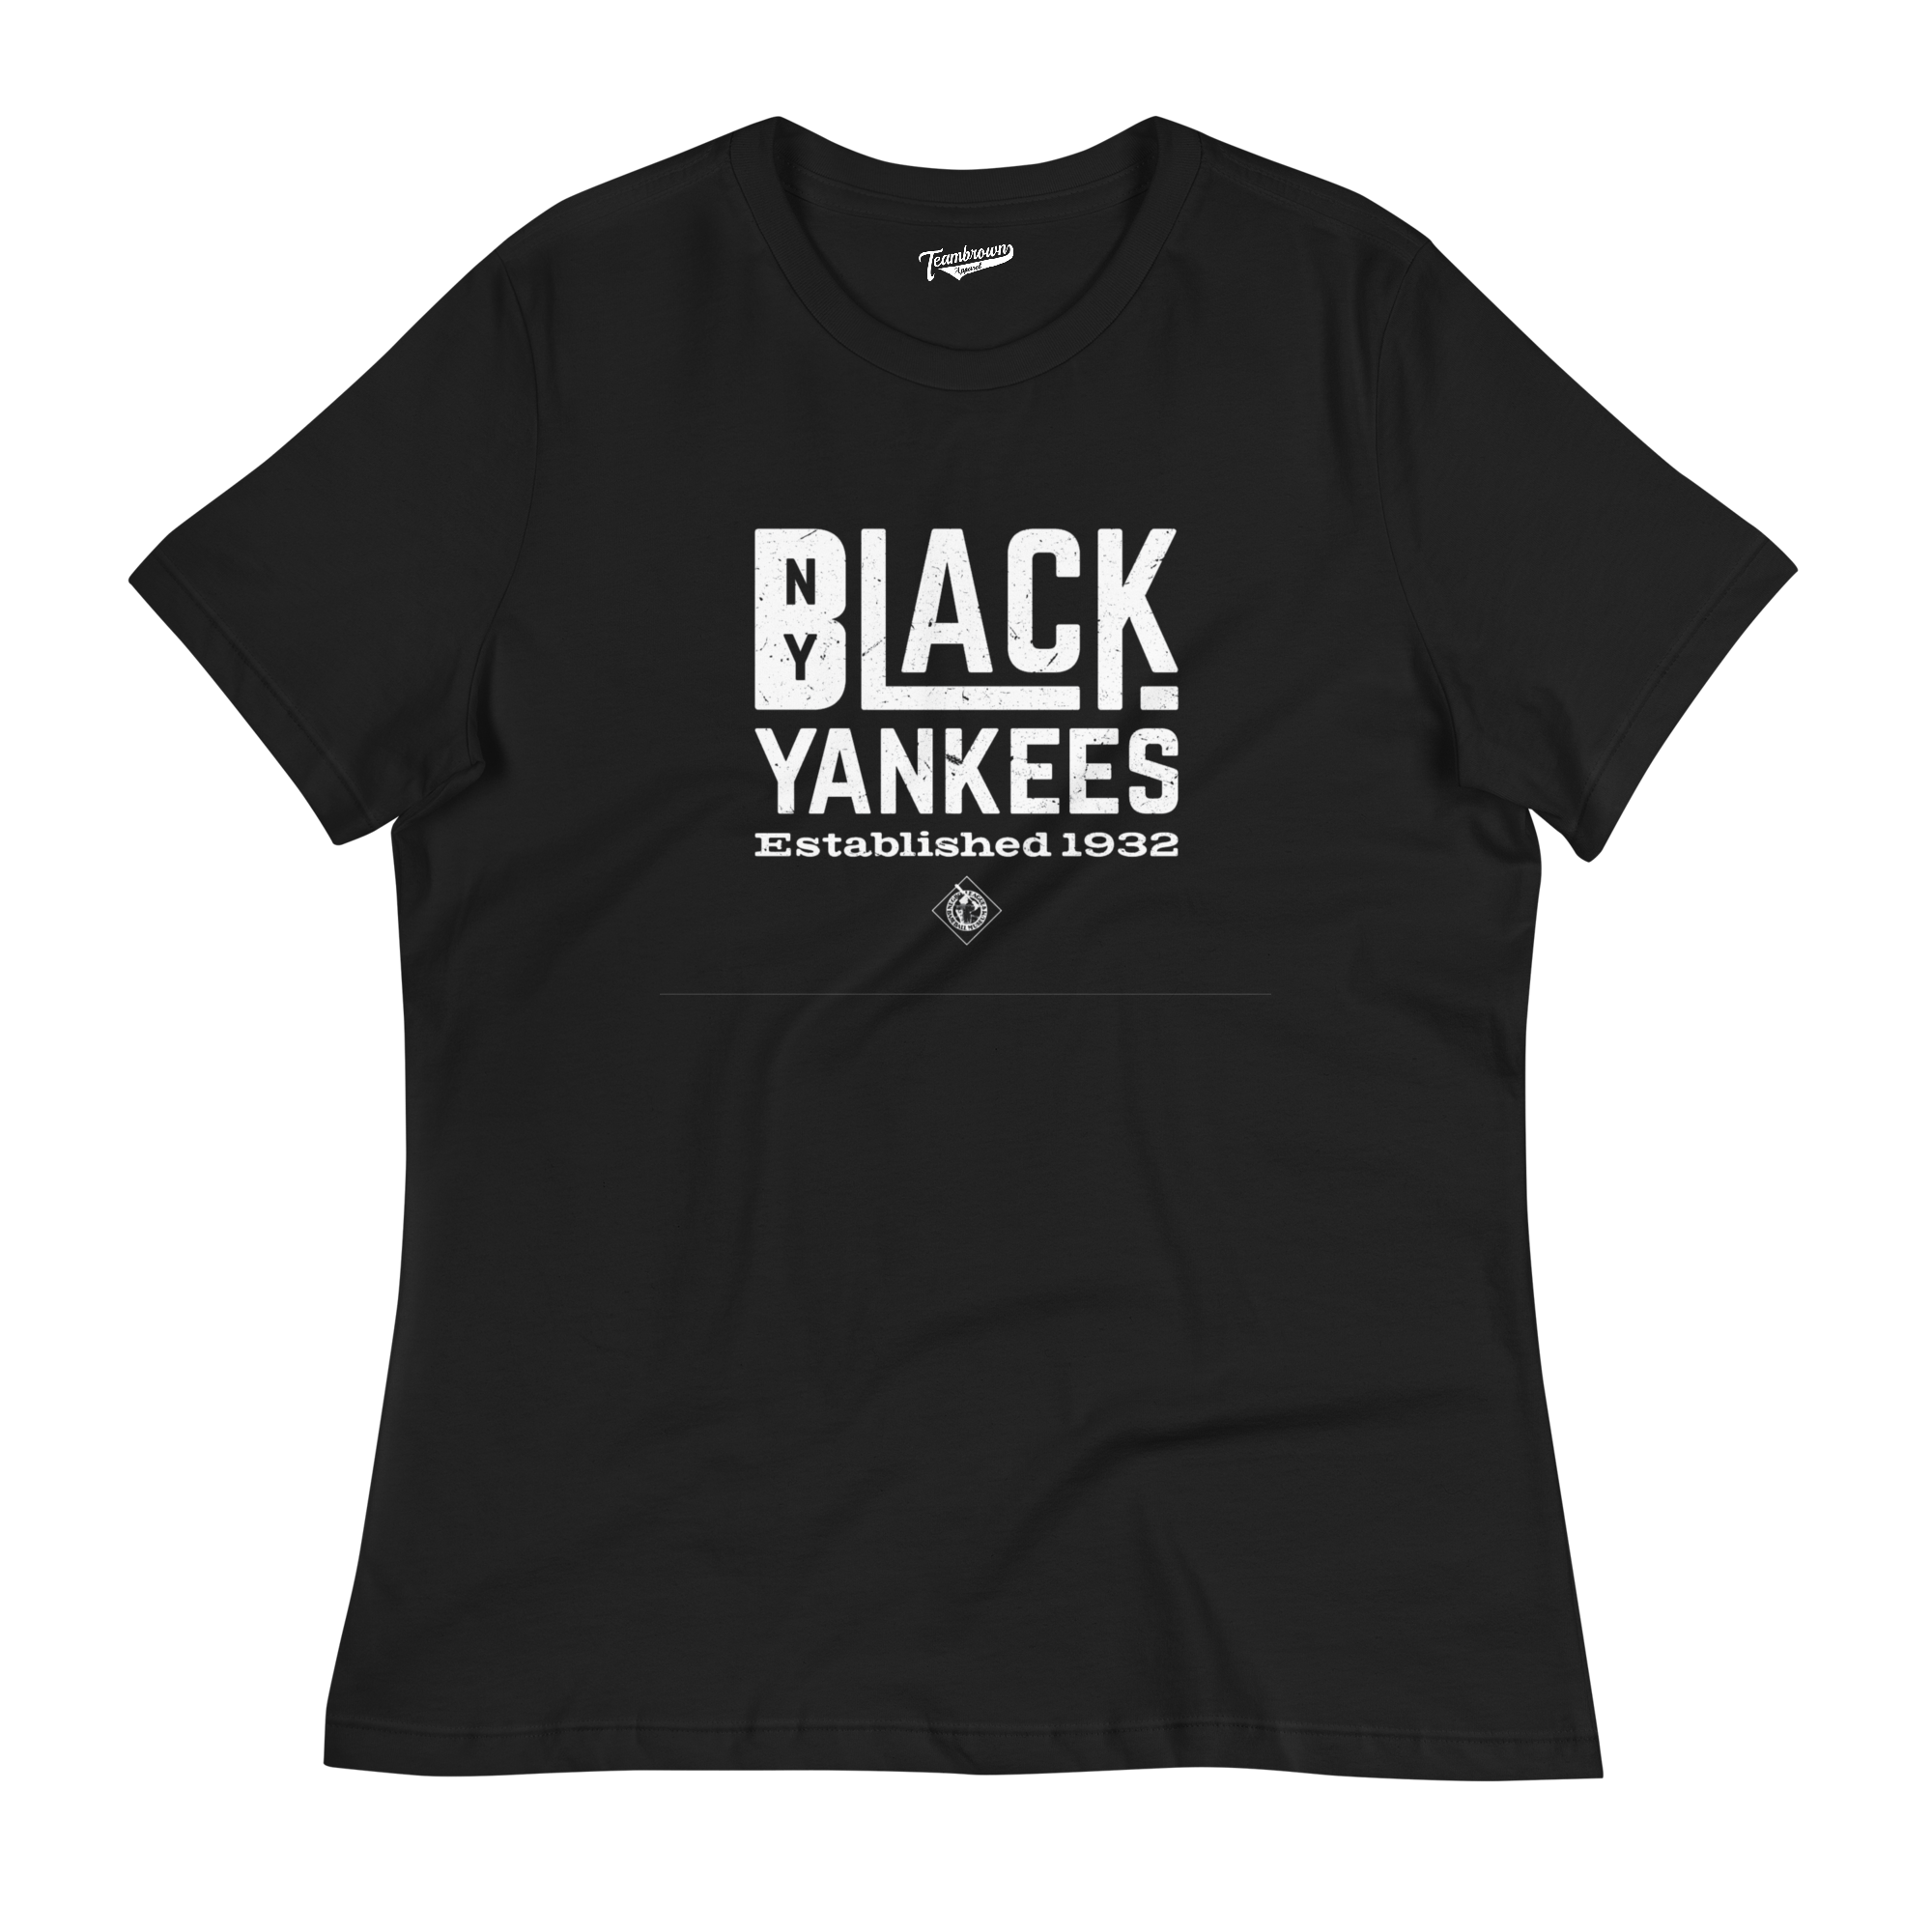 Officially Licensed - NLBM Women's New York Black Yankees Shirt | Teambrown Apparel Black / Adult L / Women's Relaxed Fit T-Shirt